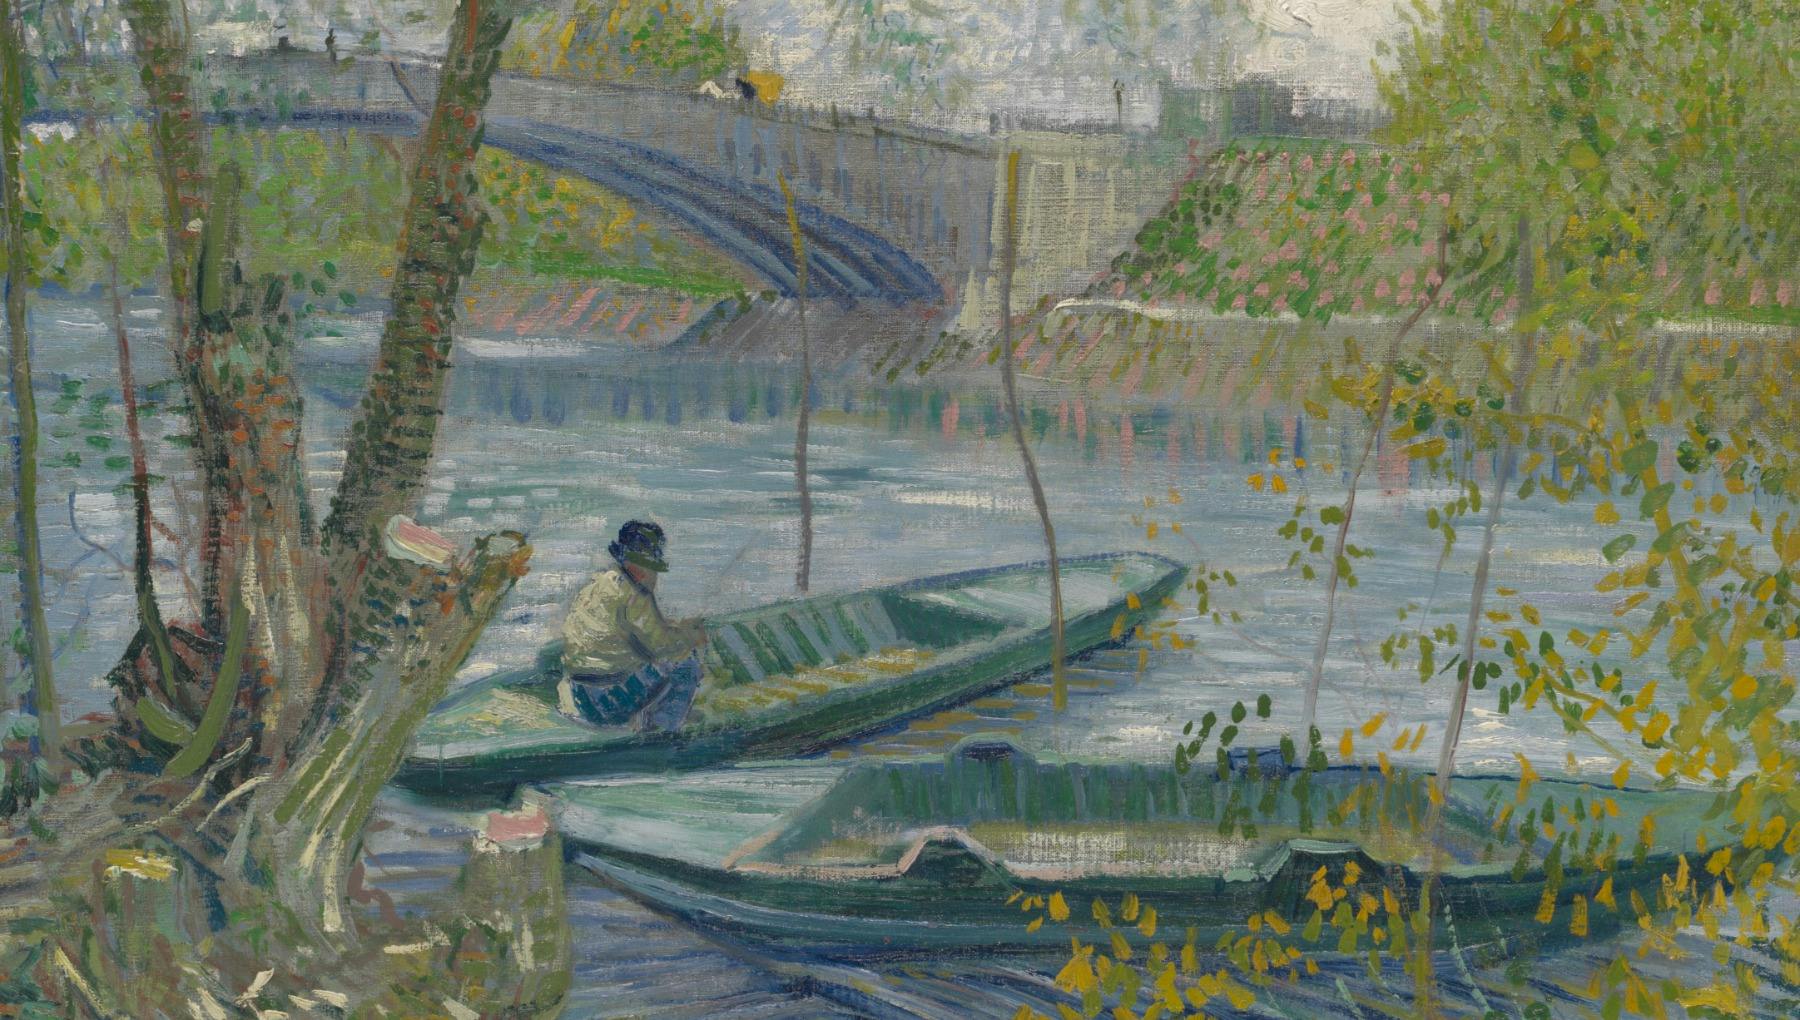 Vincent van Gogh, Fishing in Spring, the Pont de Clichy (Asnieres), 1887, The Art Institute of Chicago Gift of Charles Deering McCormick, Brooks McCormick, and the McCormick Family